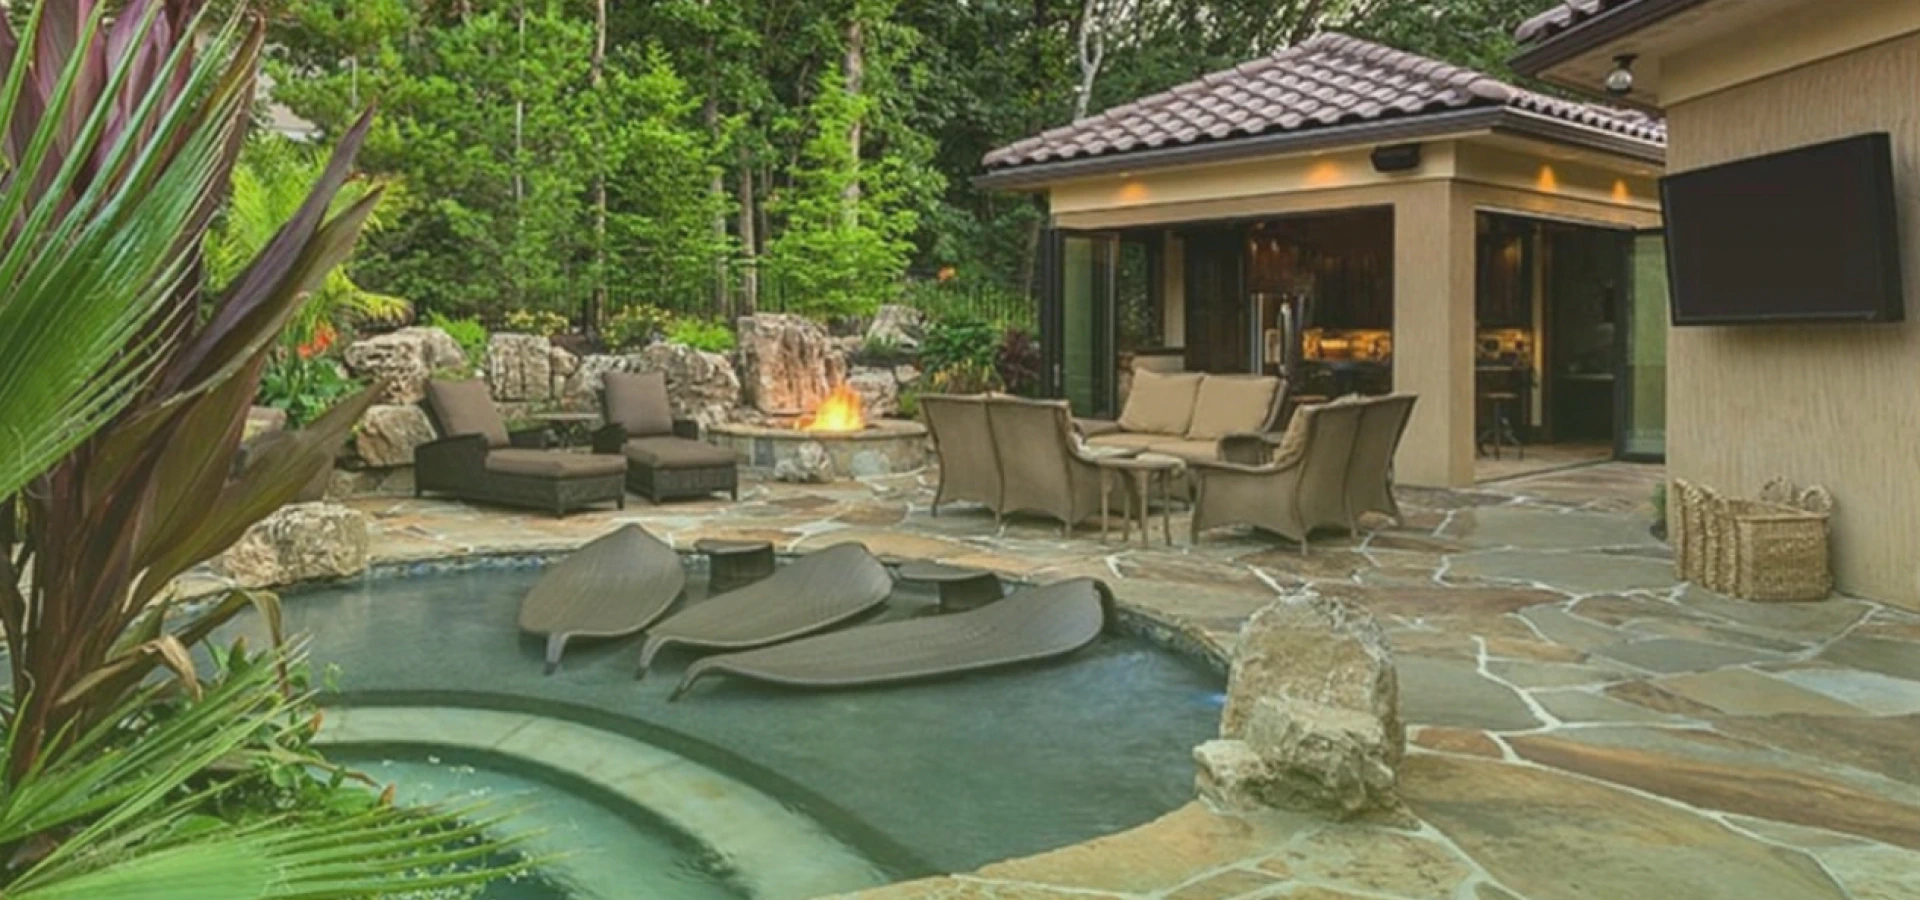 beautiful hardscape place at backyard with small pool fireplace and patio columbus oh